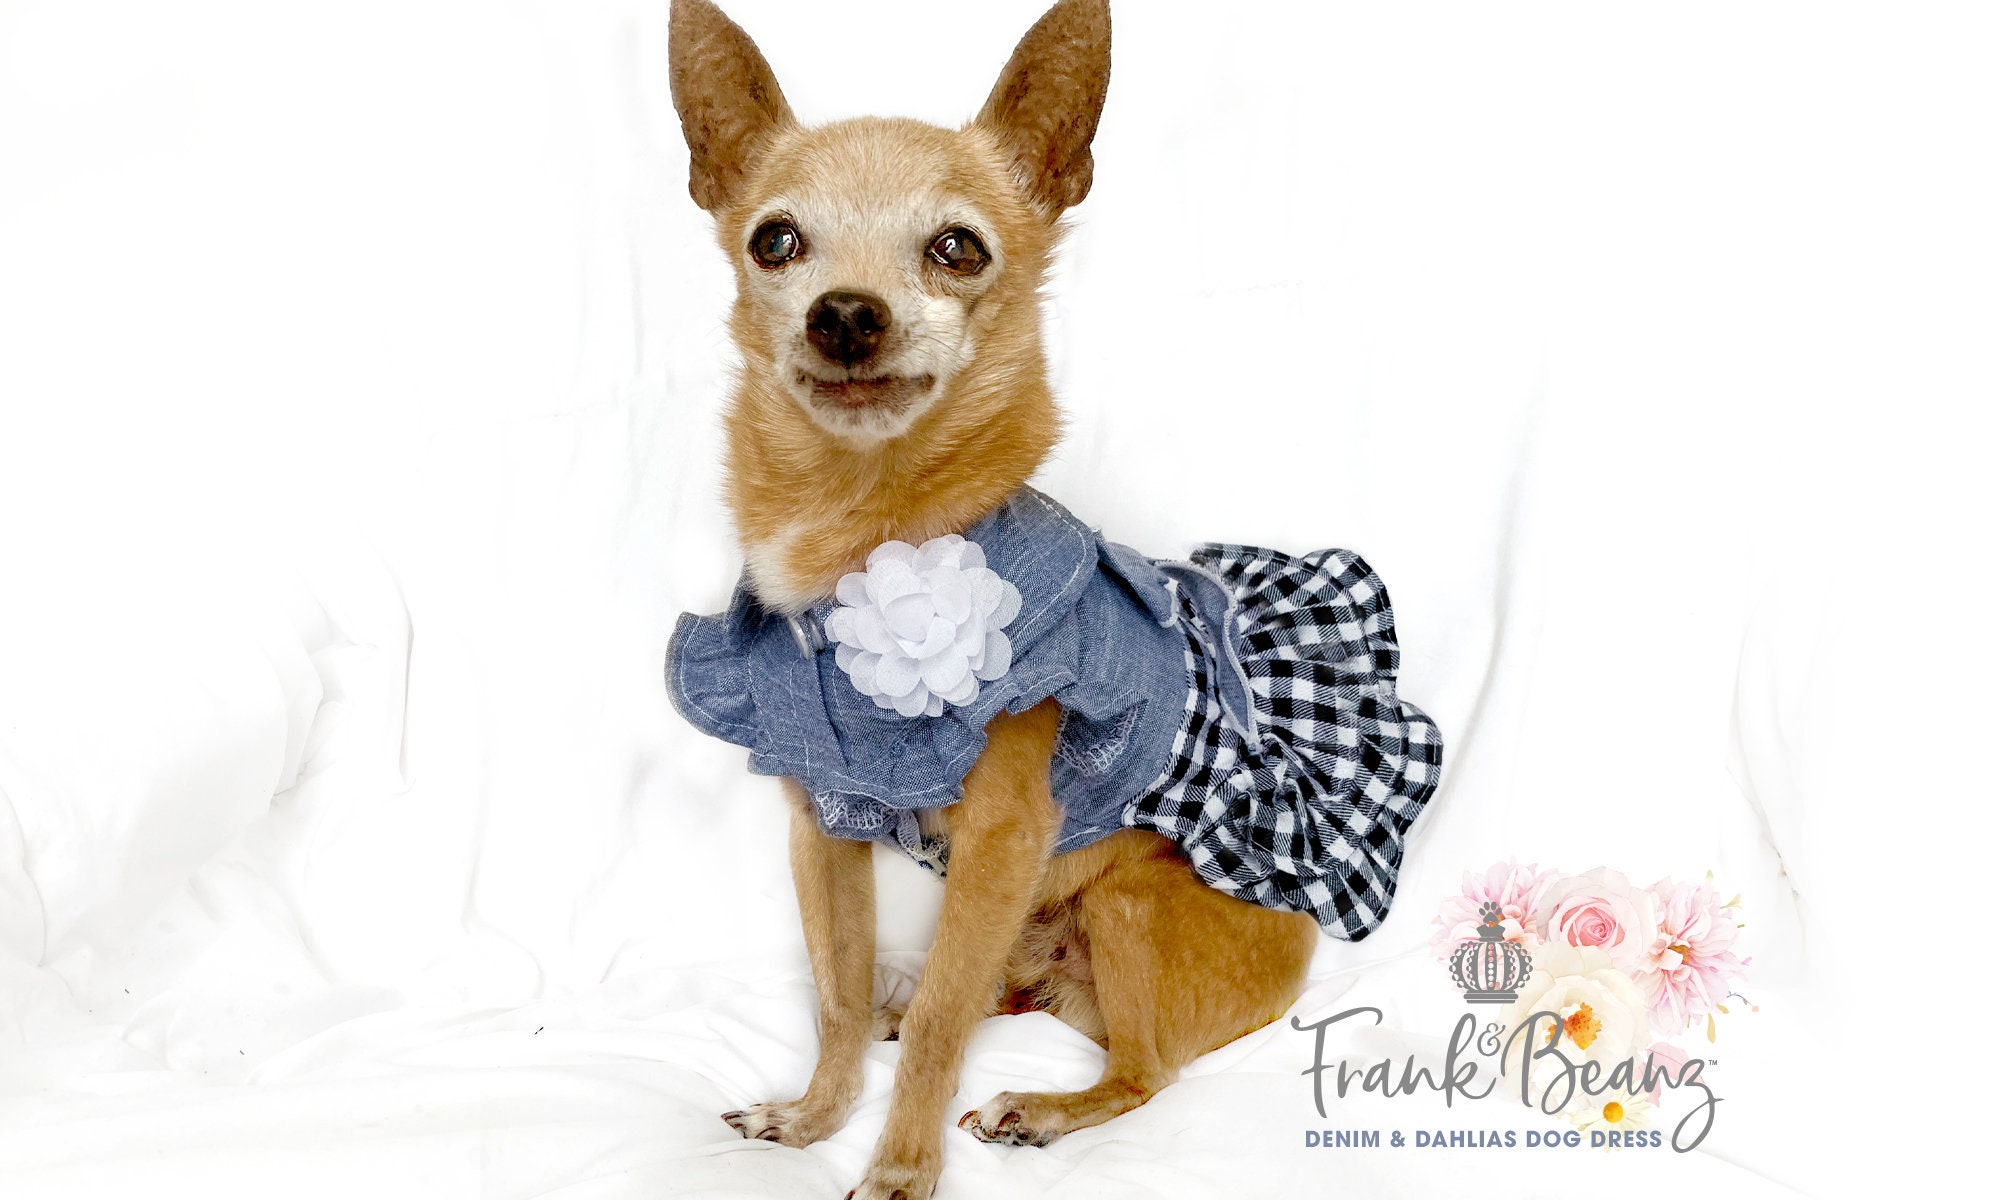 Girl Dog Clothes 4 Pack Spring Summer Dog Dresses for Small Dogs Chihuahua Yorkie Hawaiian Puppy Dress Soft Breathable Pet Cat Skirt Outfit Apparel